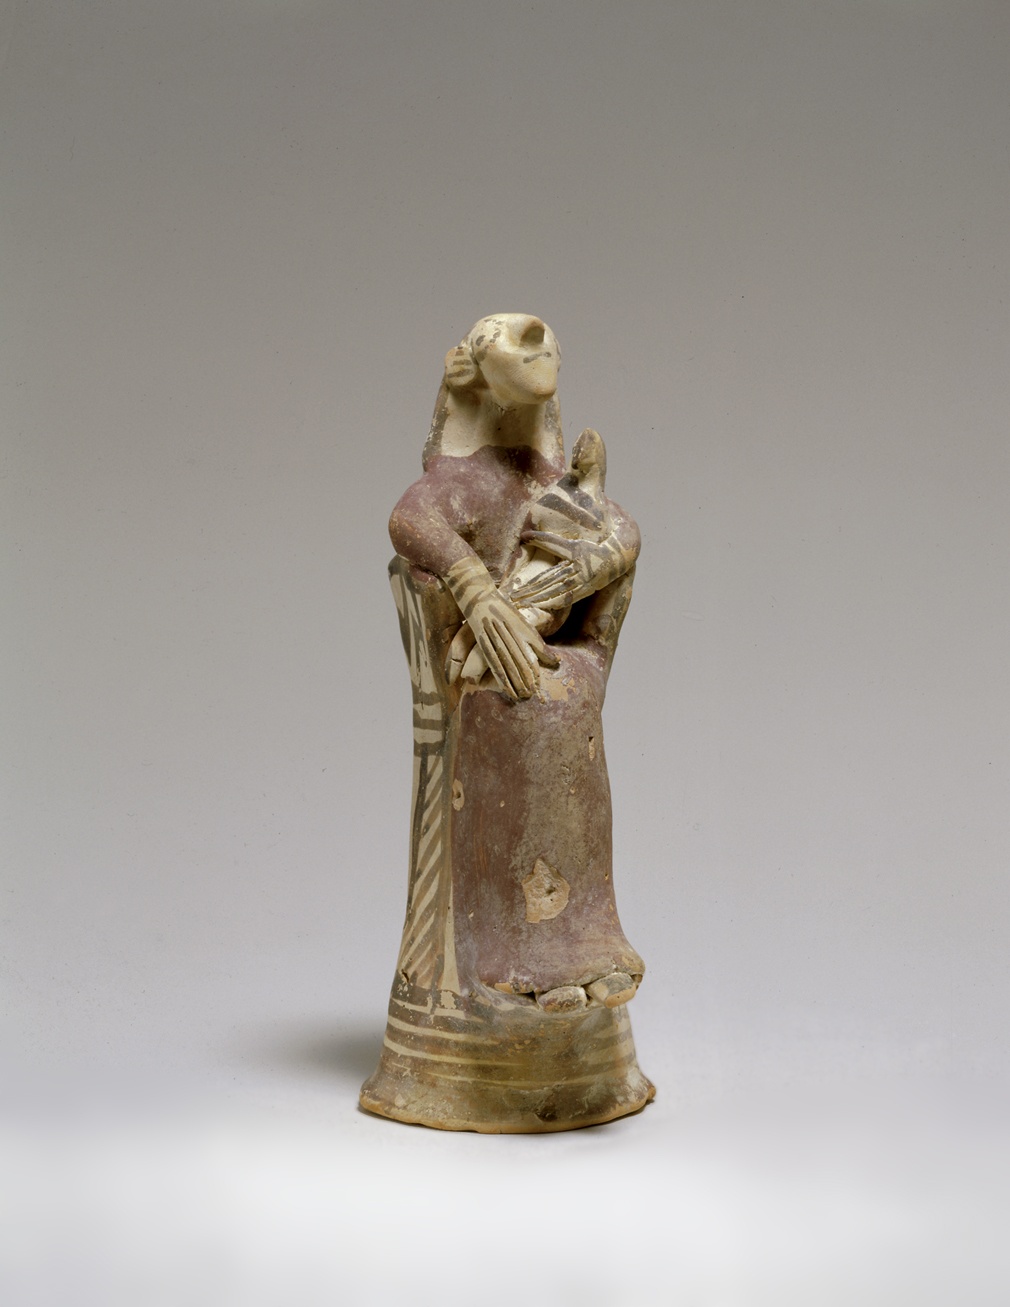 084. Mother Goddess with Child - Archaic